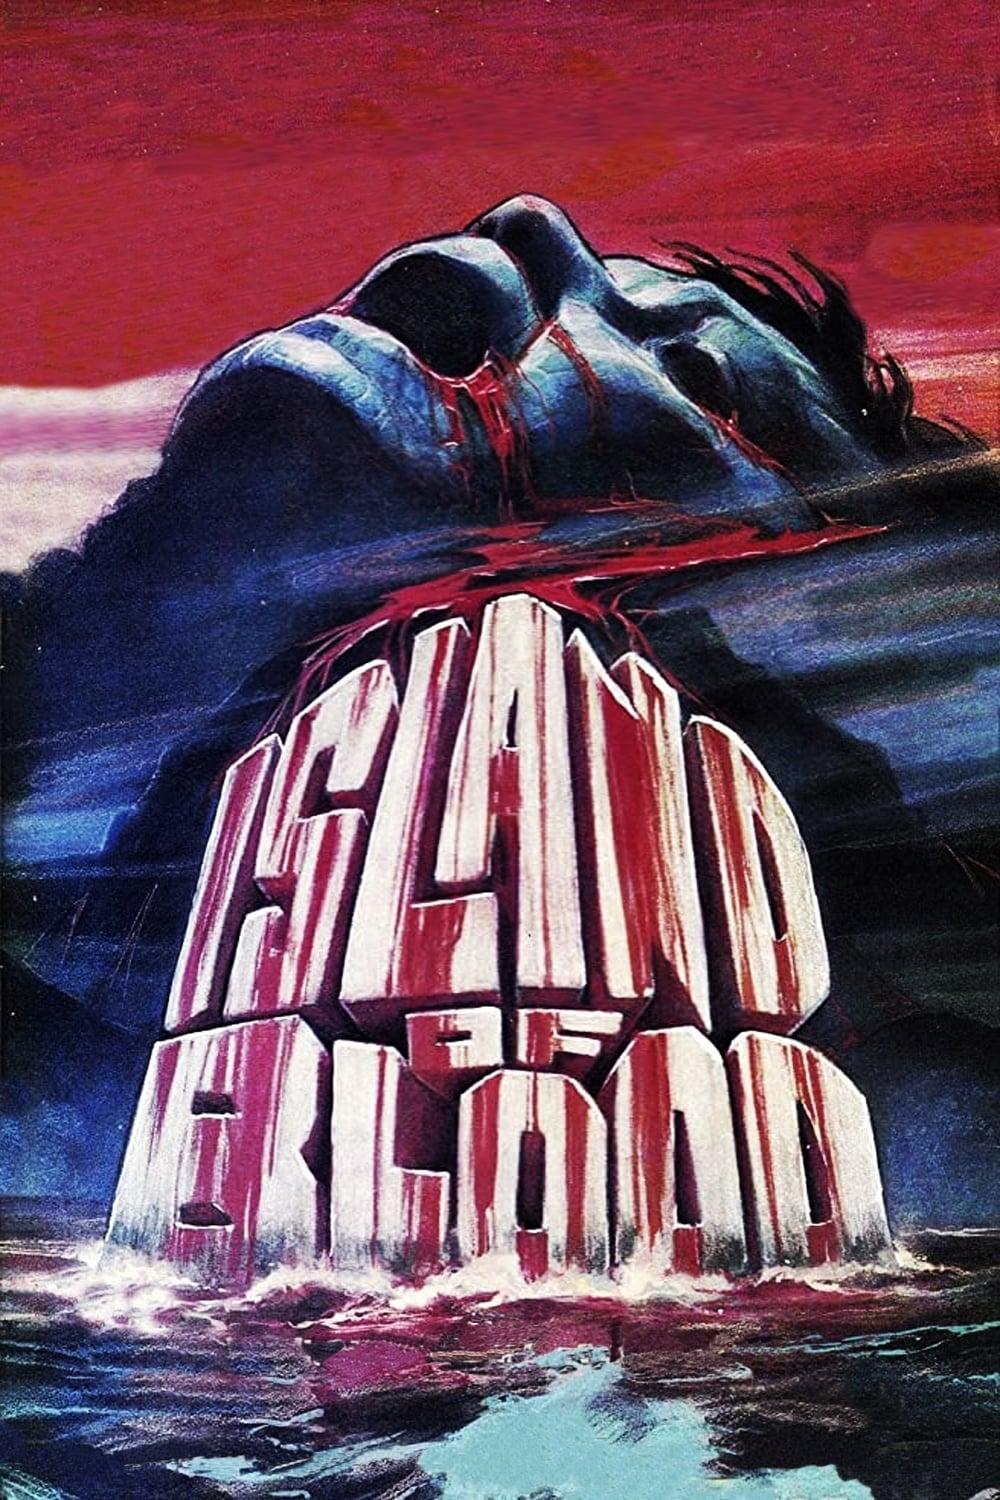 Island of Blood poster